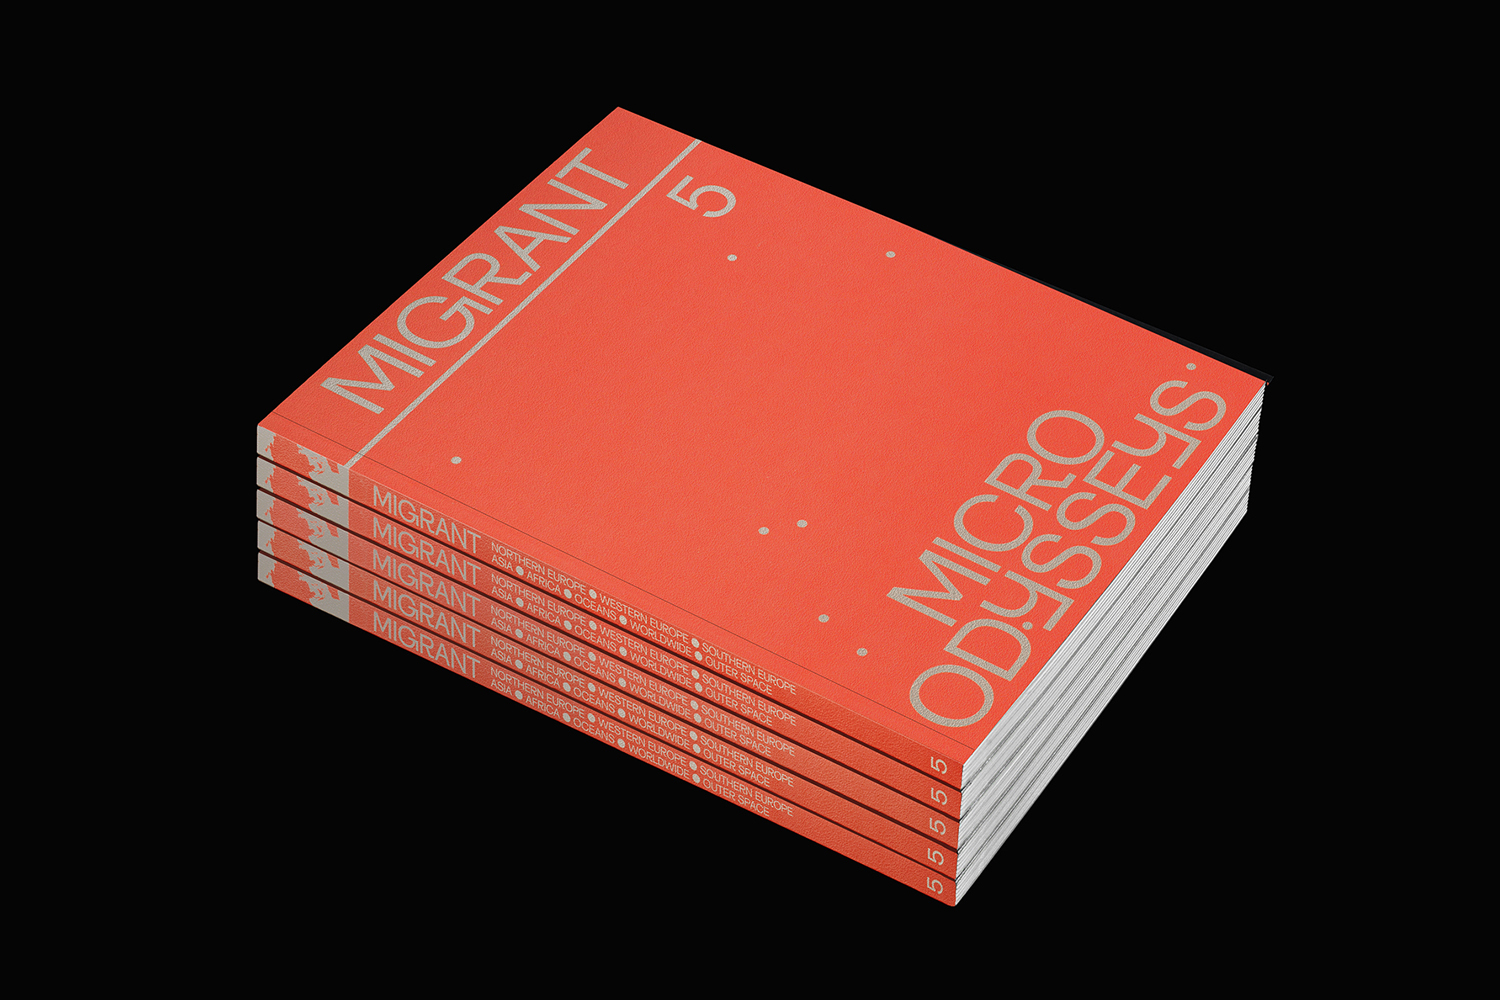 Journal Design Inspiration – Migrant Journal No.5 by Offshore Studio